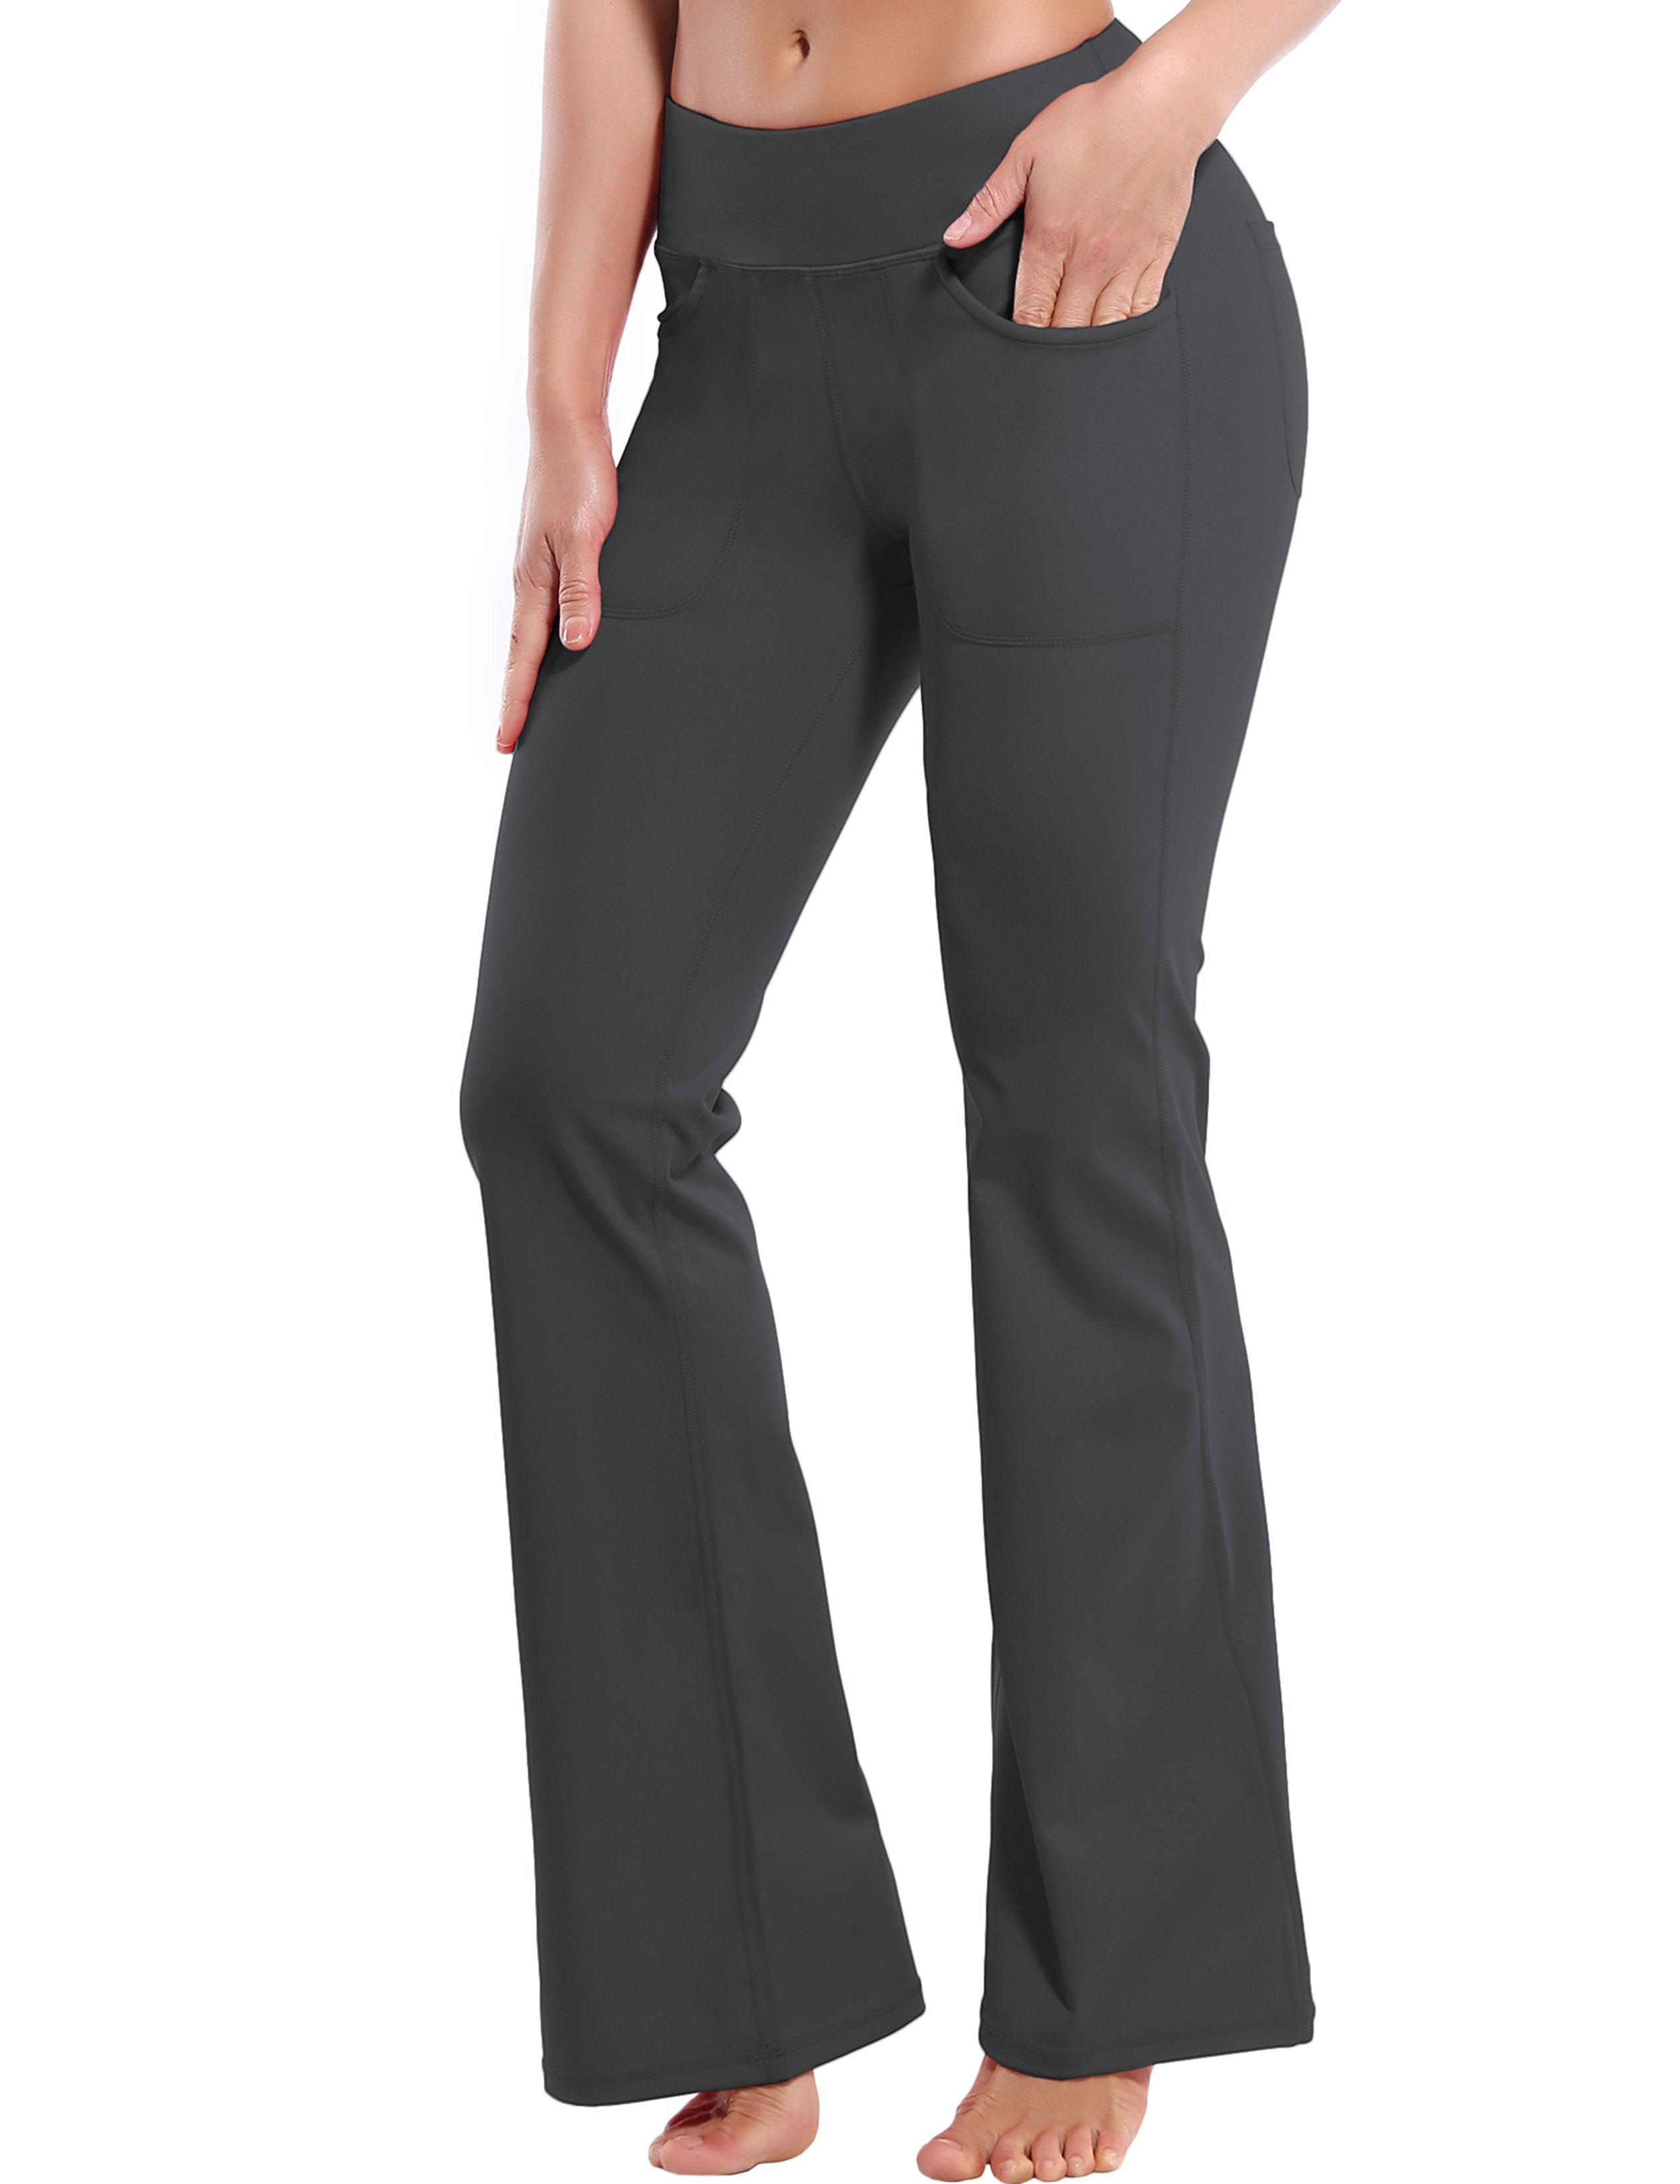 4 Pockets Bootcut Leggings shadowcharcoal 75%Nylon/25%Spandex Fabric doesn't attract lint easily 4-way stretch No see-through Moisture-wicking Inner pocket Four lengths